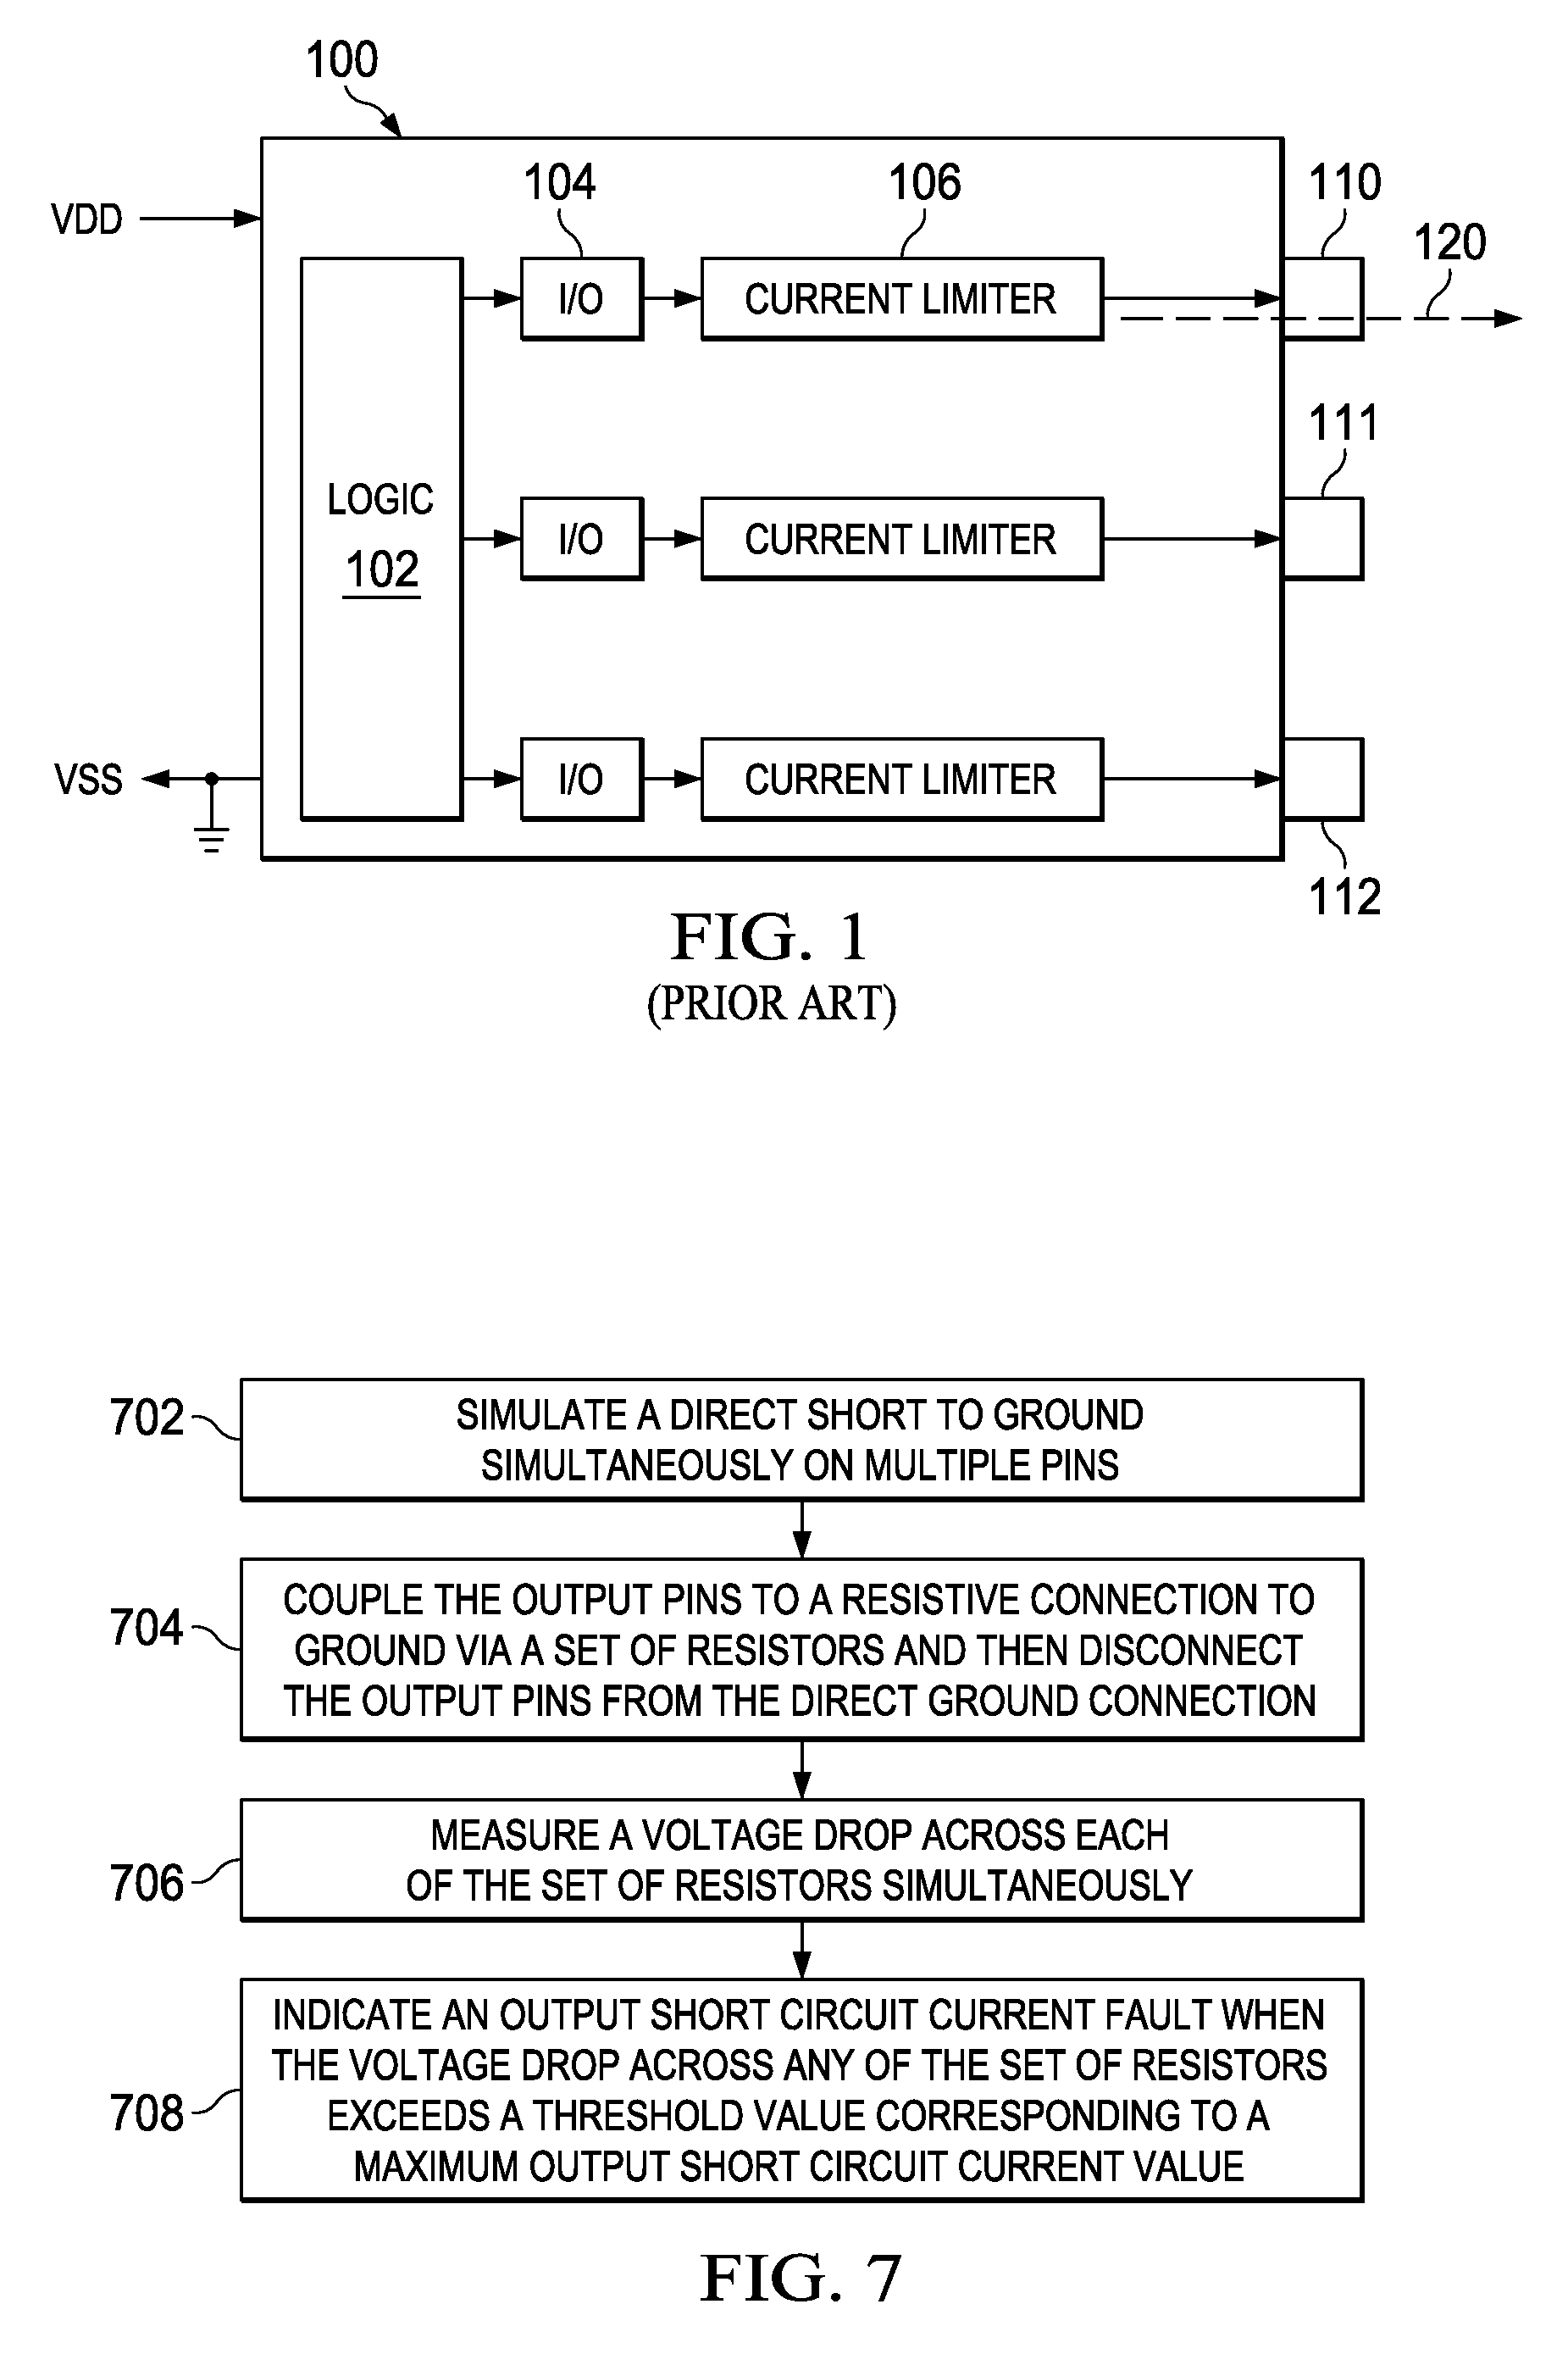 Testing integrated circuit packaging for output short circuit current